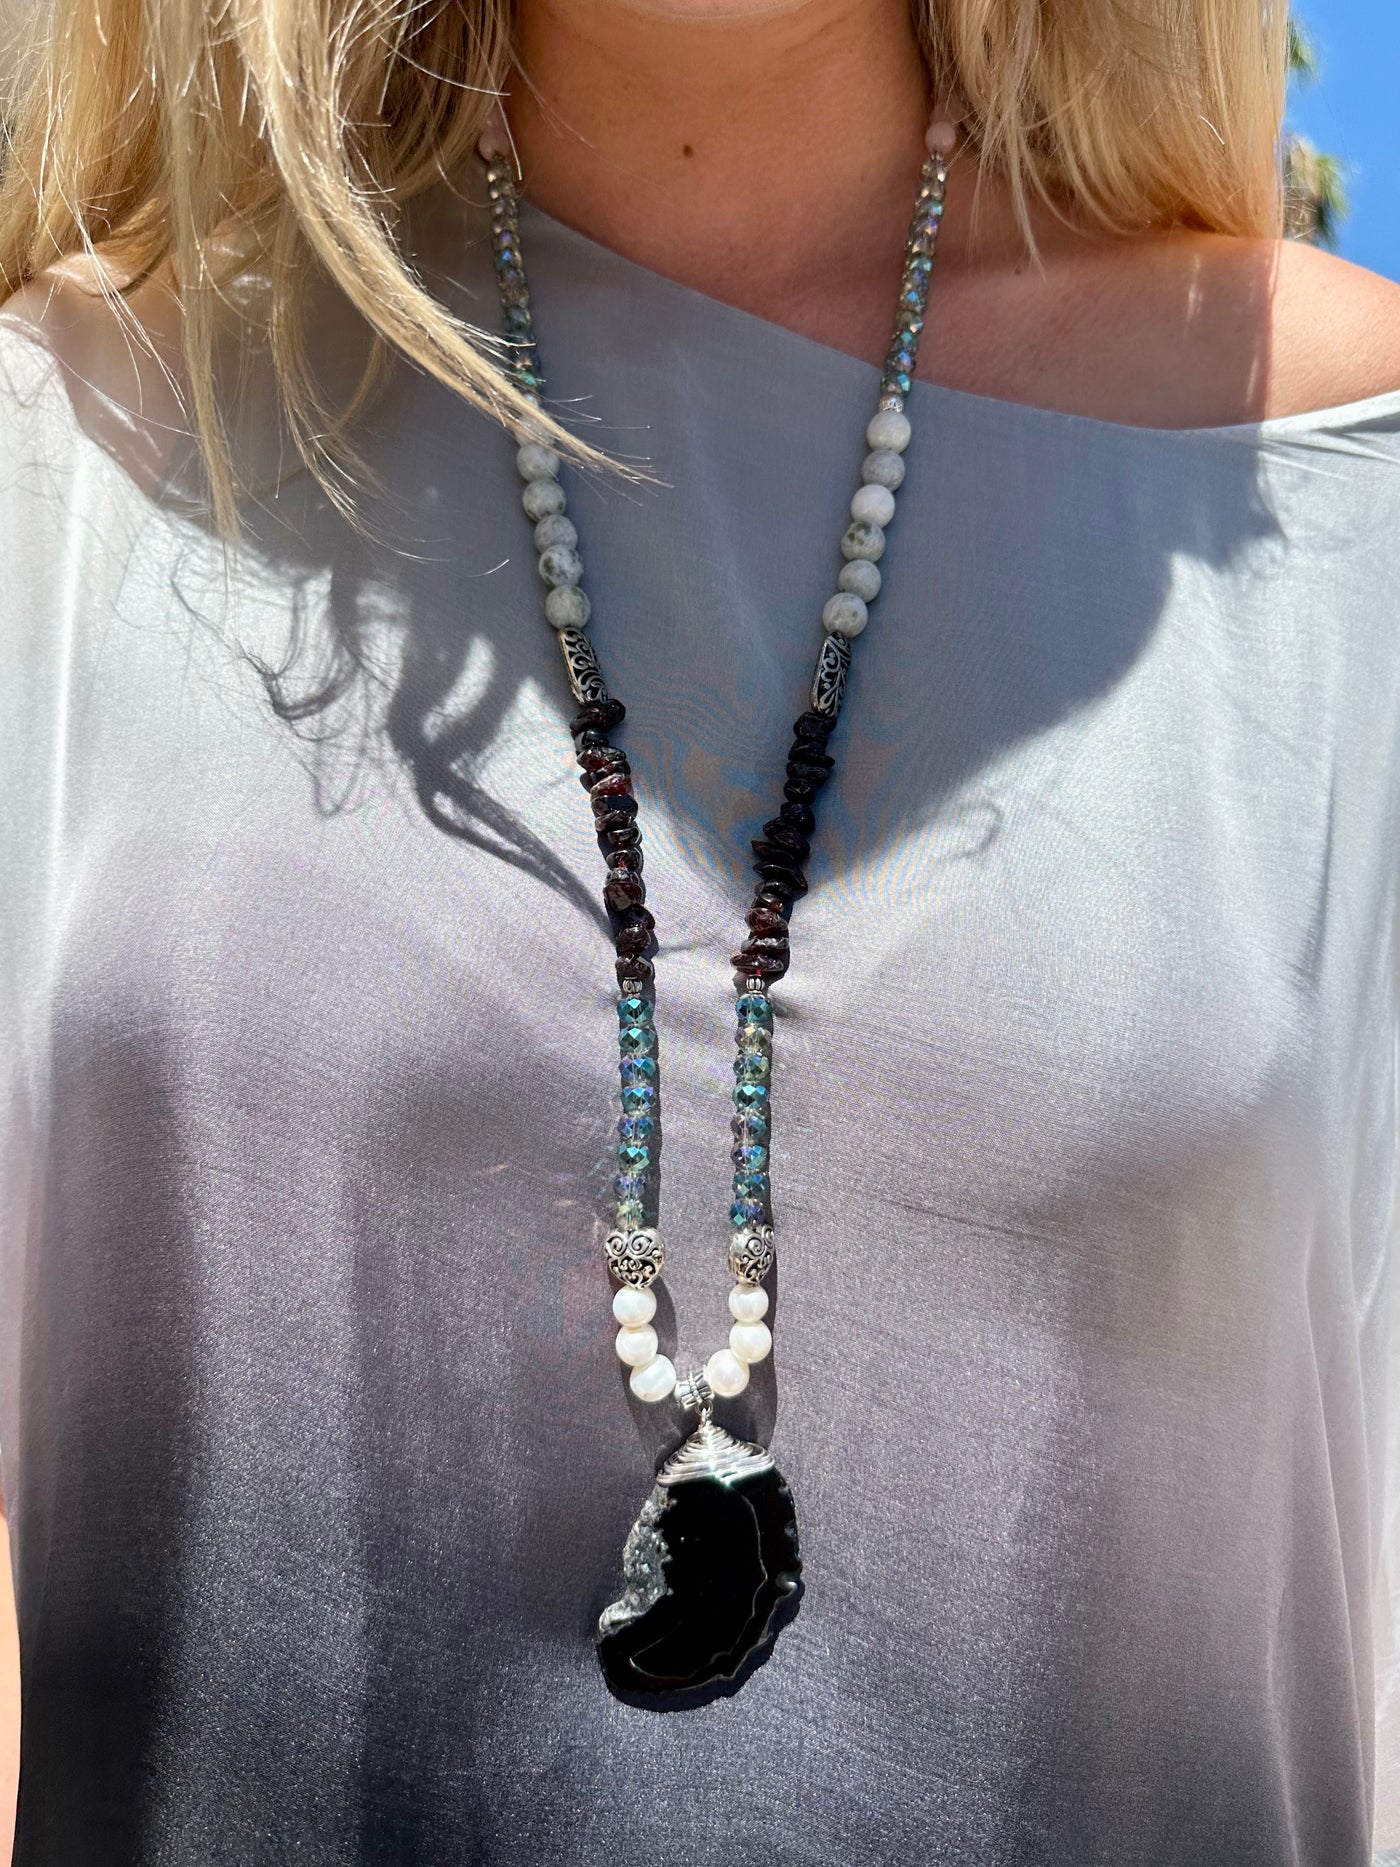 Sumptuous Black Agate Pendant With Fresh Water Pearls- The Nightingale Necklace